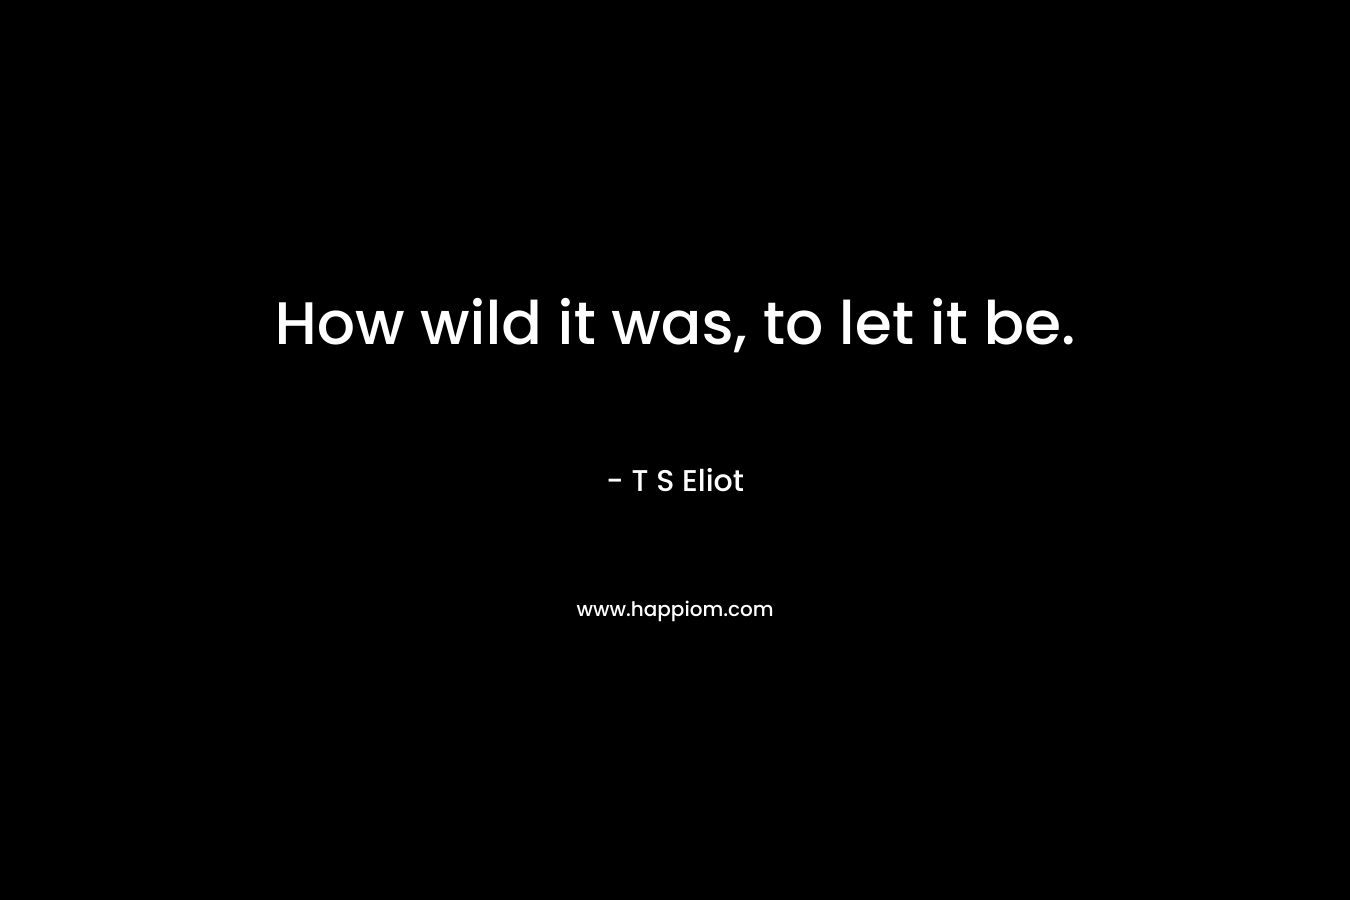 How wild it was, to let it be. – T S Eliot